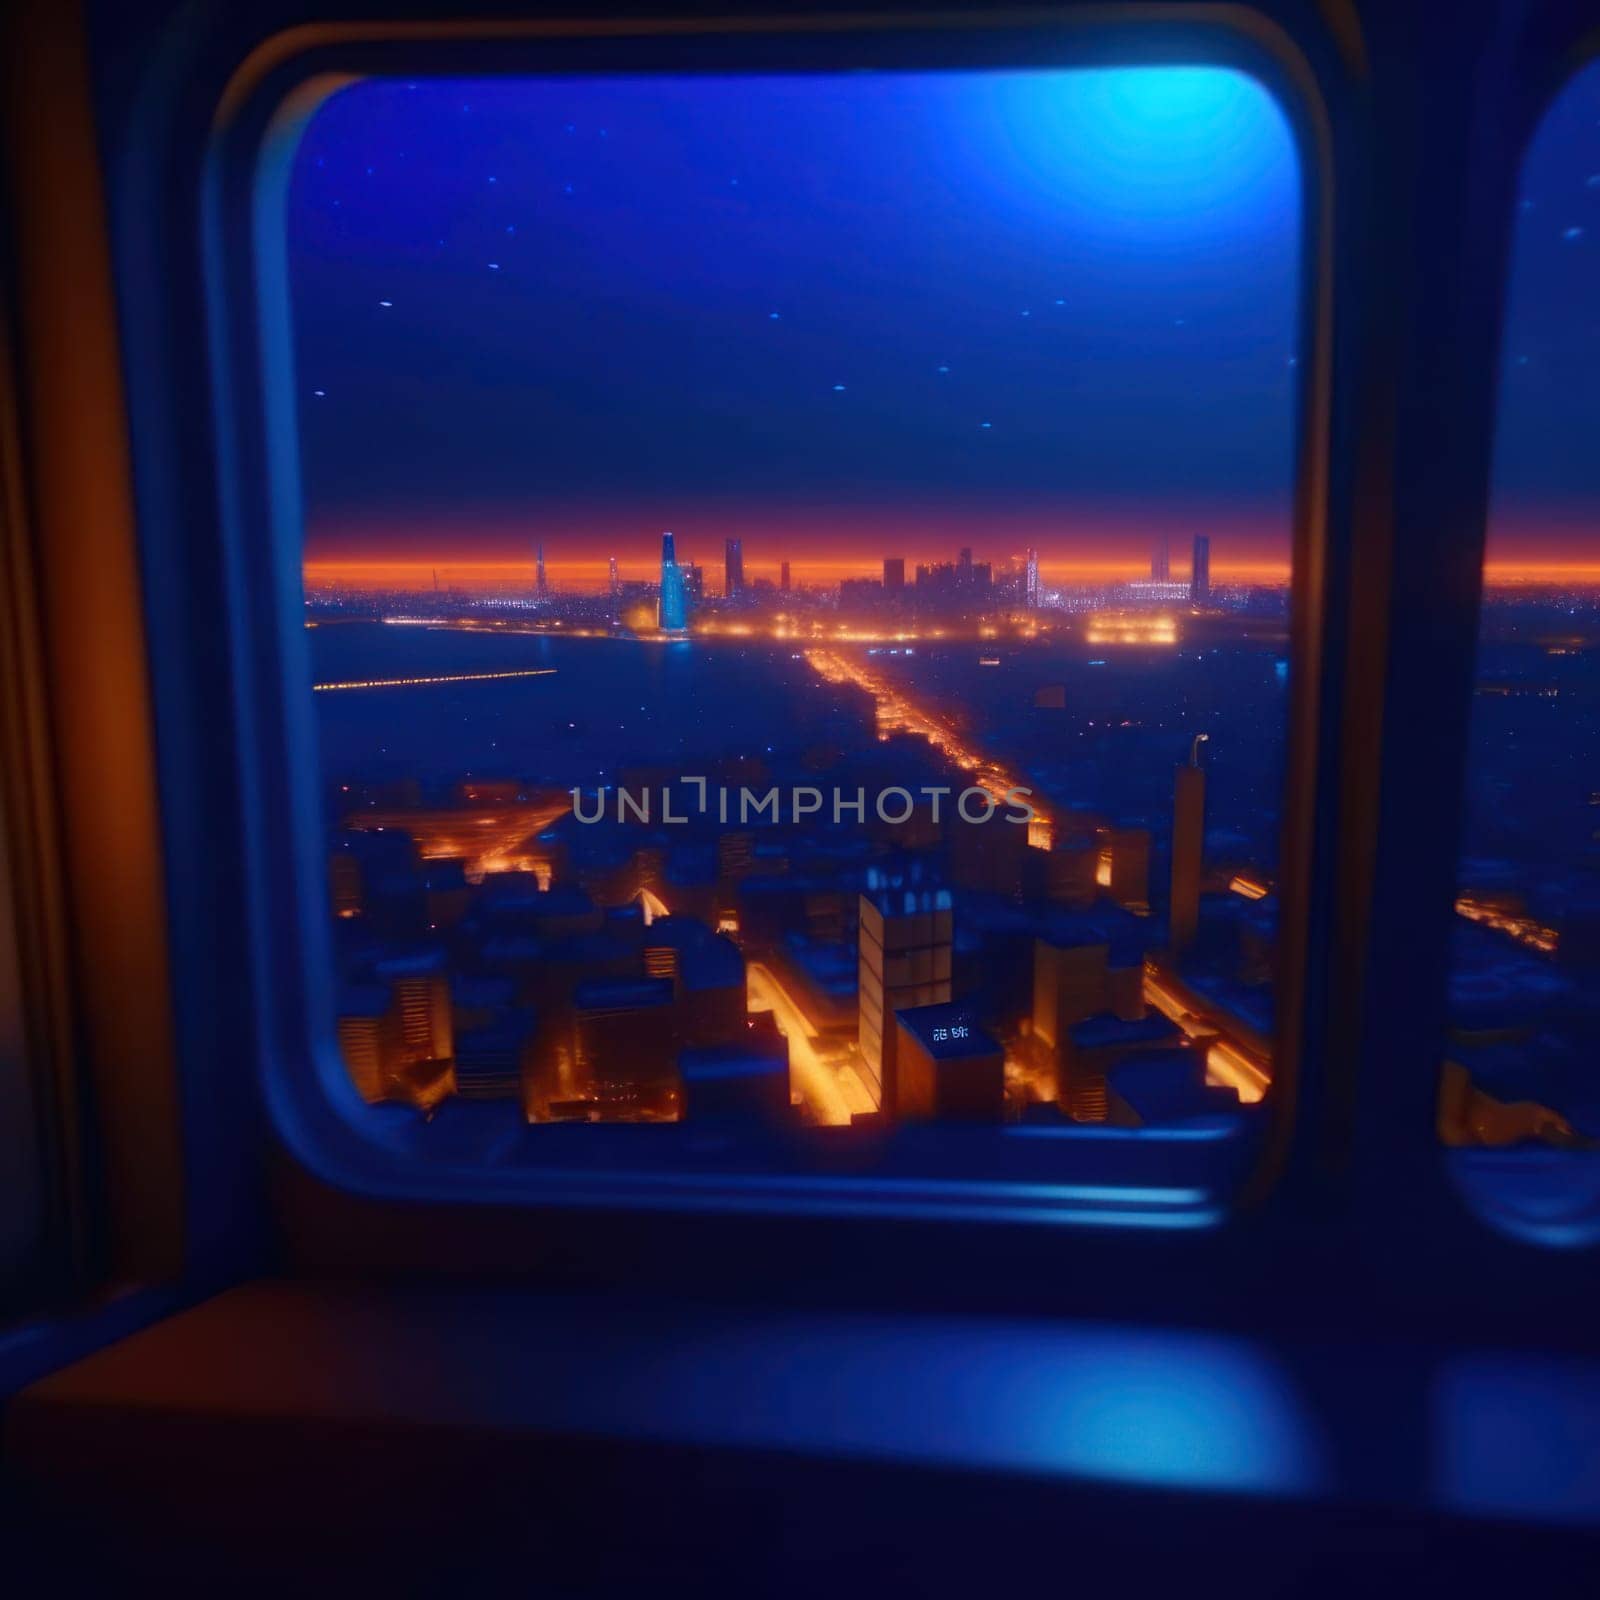 View from the airplane window by nolimit046